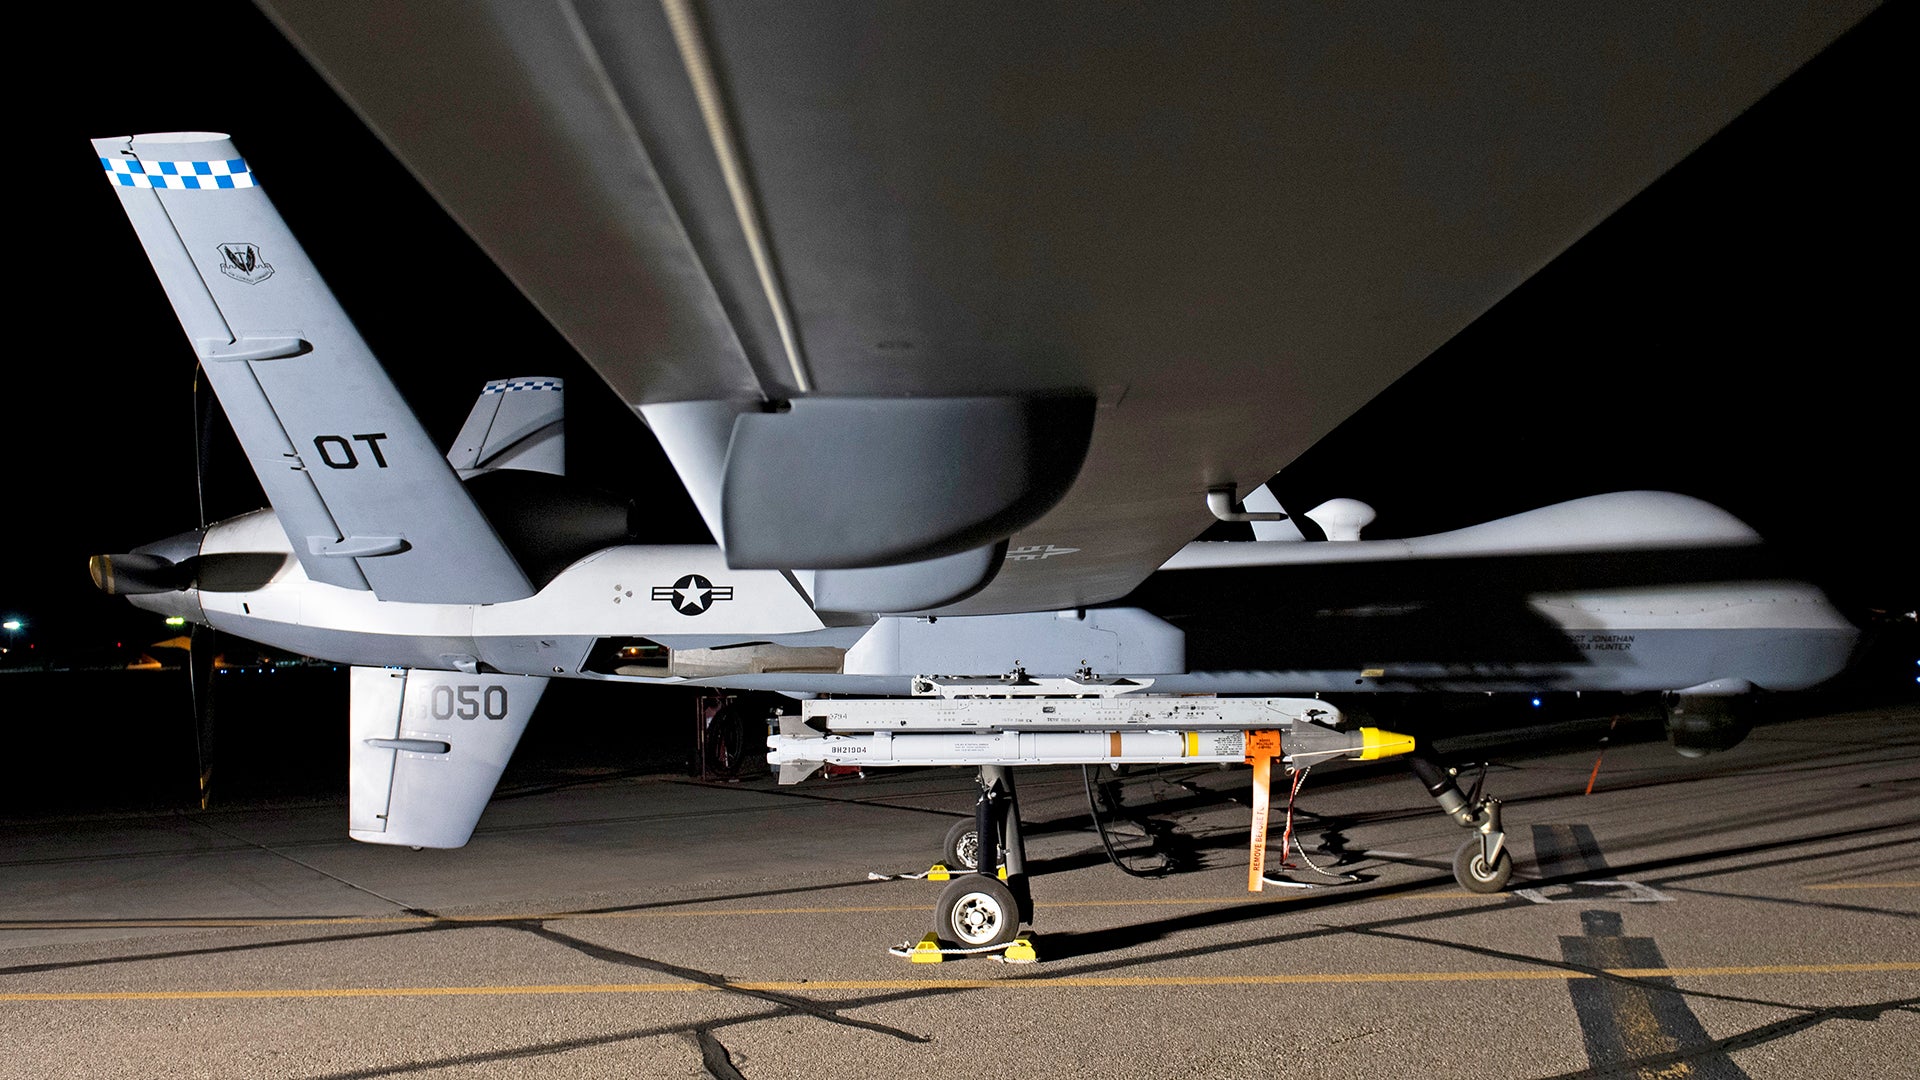 The MQ-9 Reaper can engage aerial targets with the AIM-9X Sidewinder missile, but the will to field it operationally is another story.  Today's incide